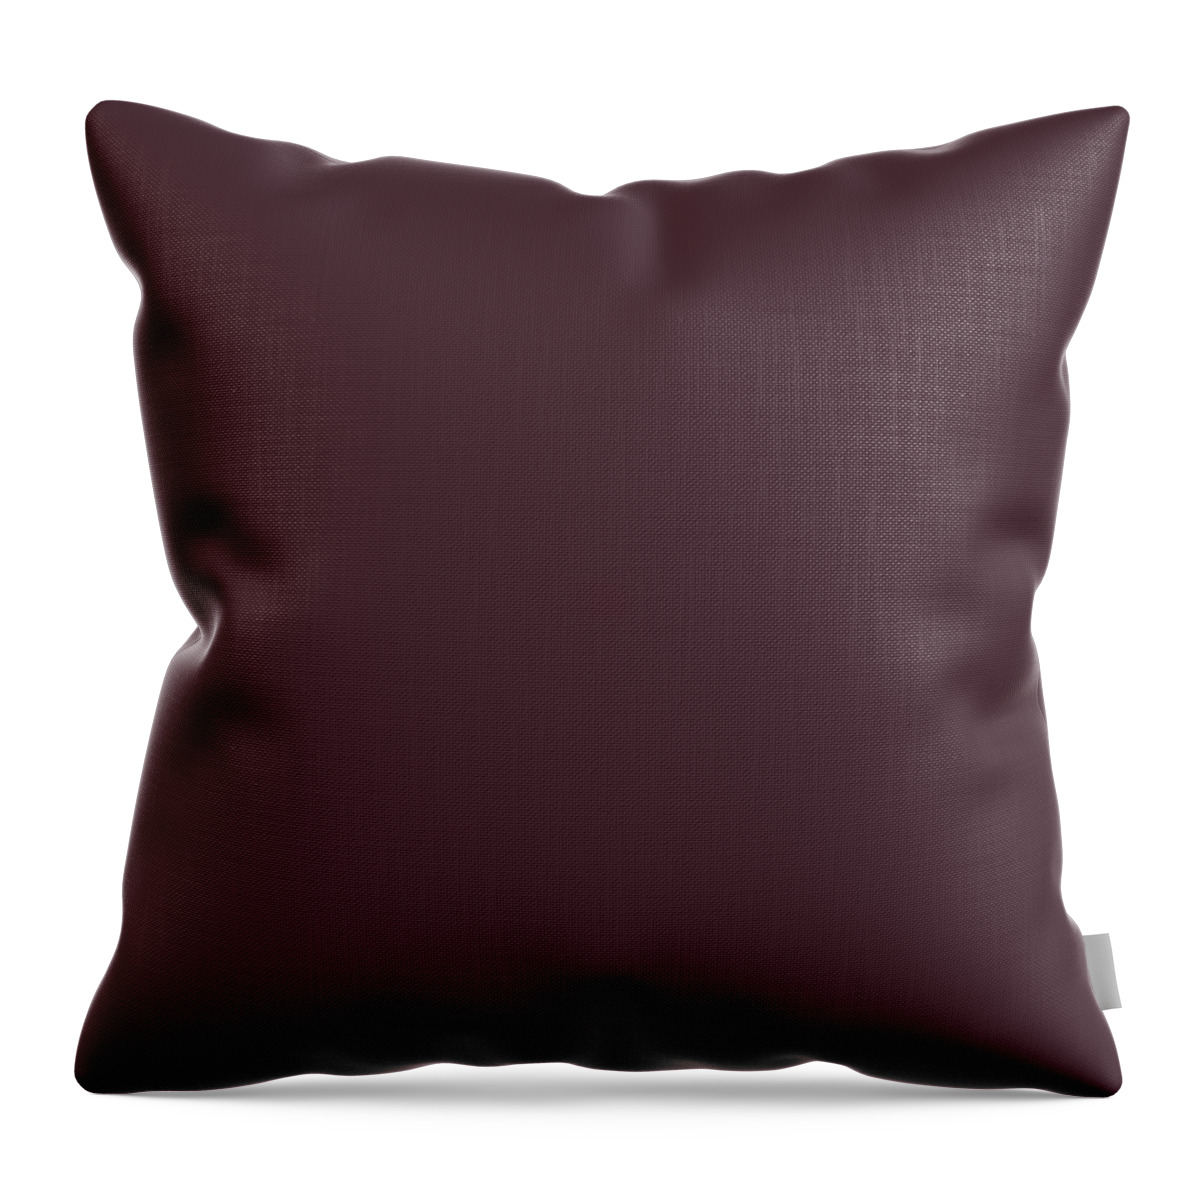 Ripe Eggplant Throw Pillow featuring the digital art Ripe Eggplant by TintoDesigns